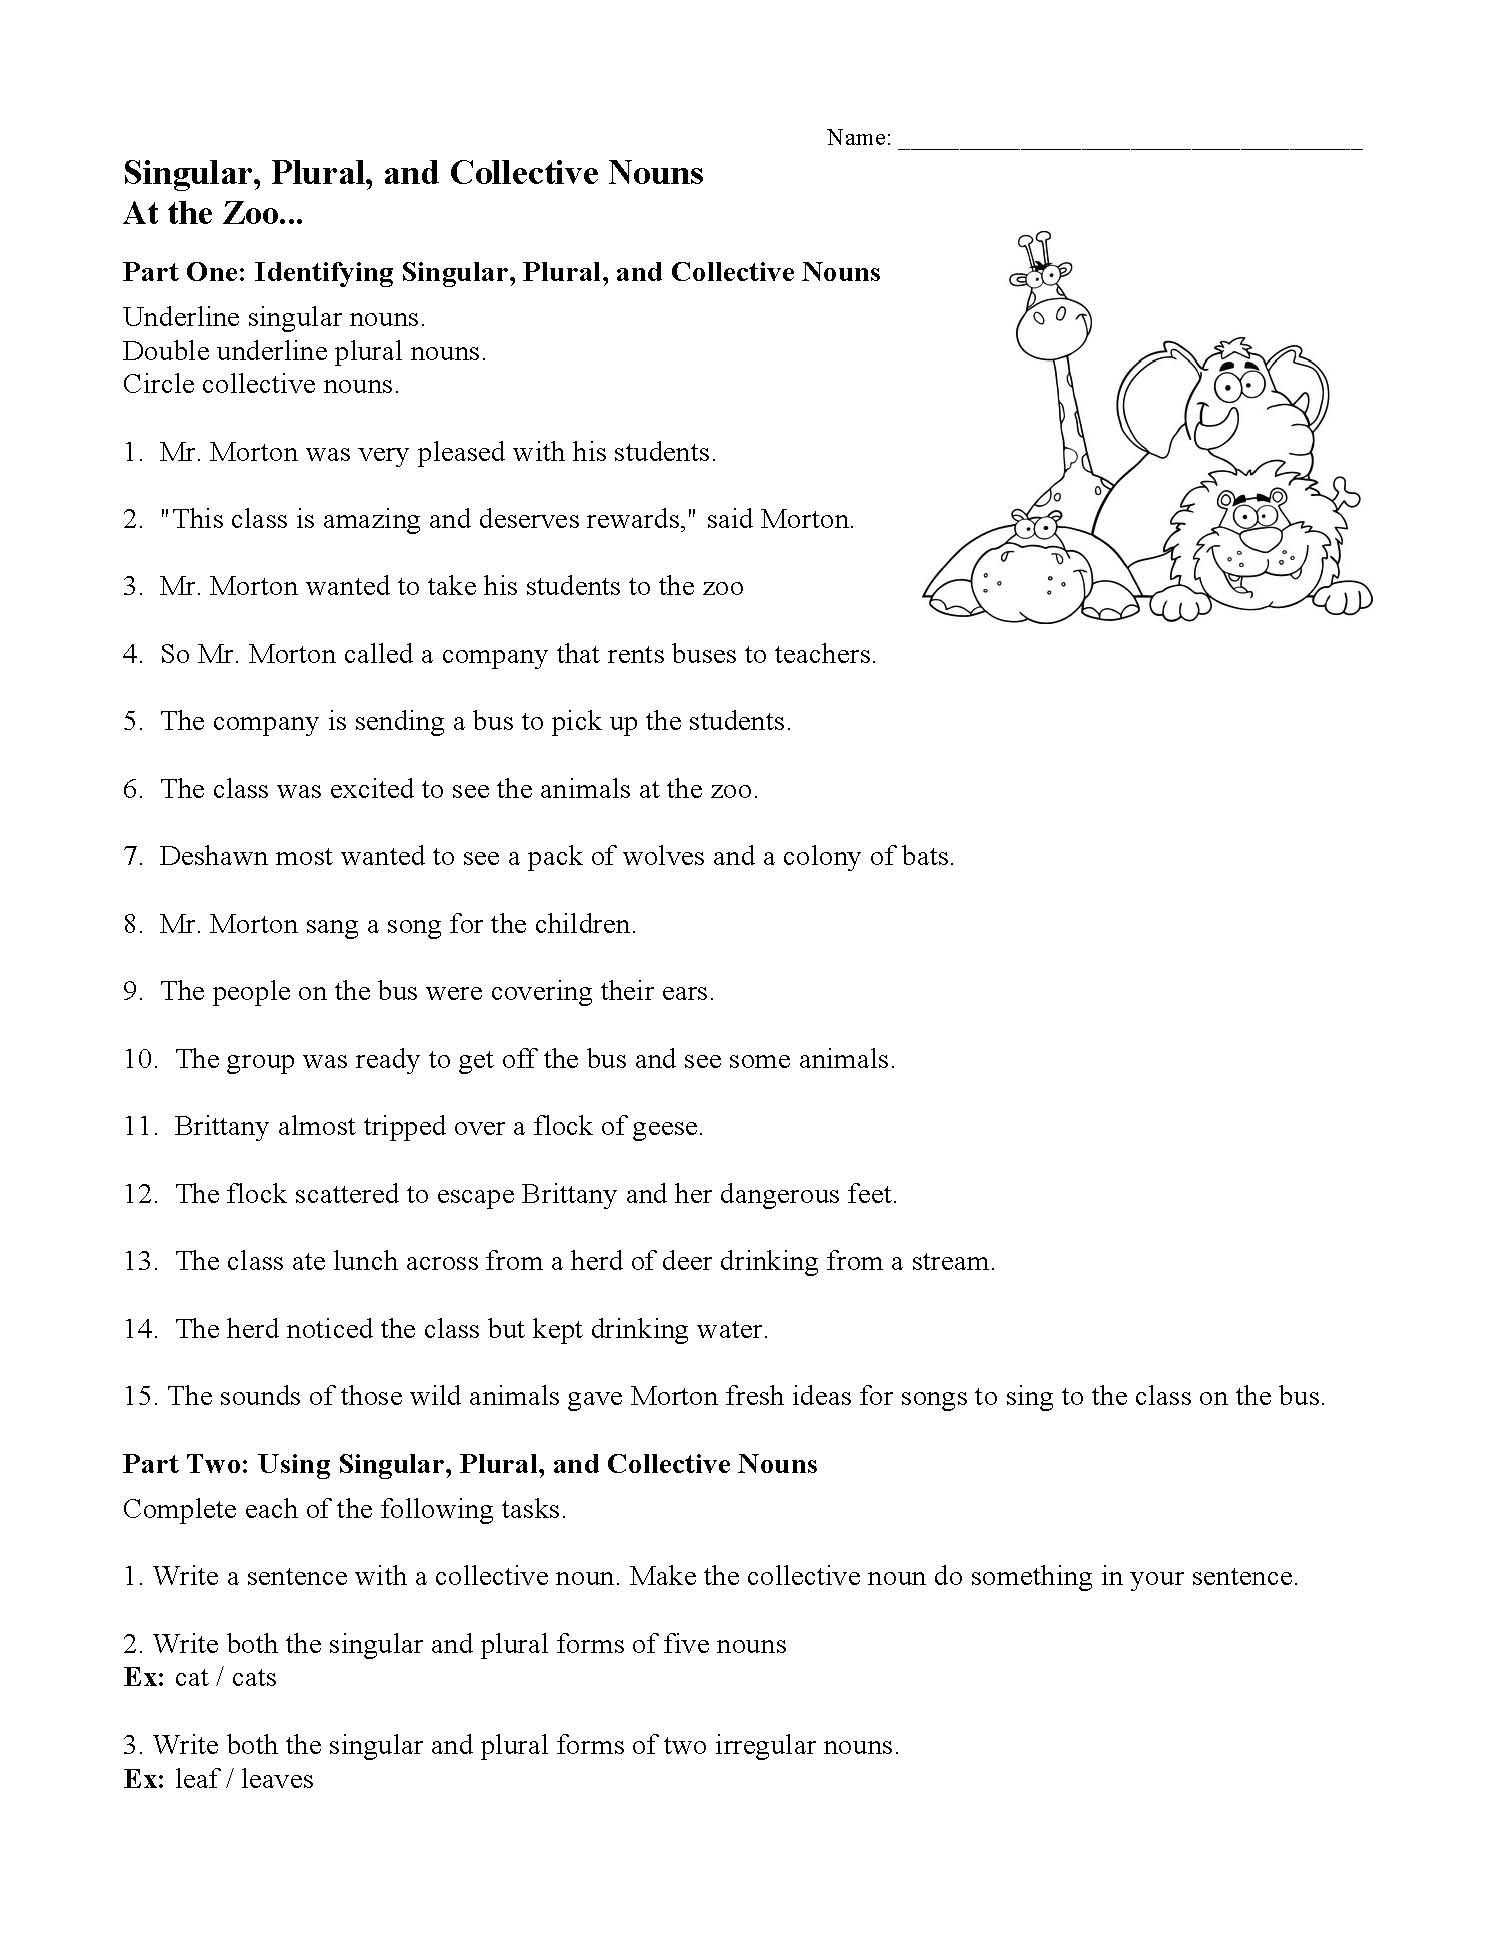 Singular Plural And Collective Nouns Worksheet Preview